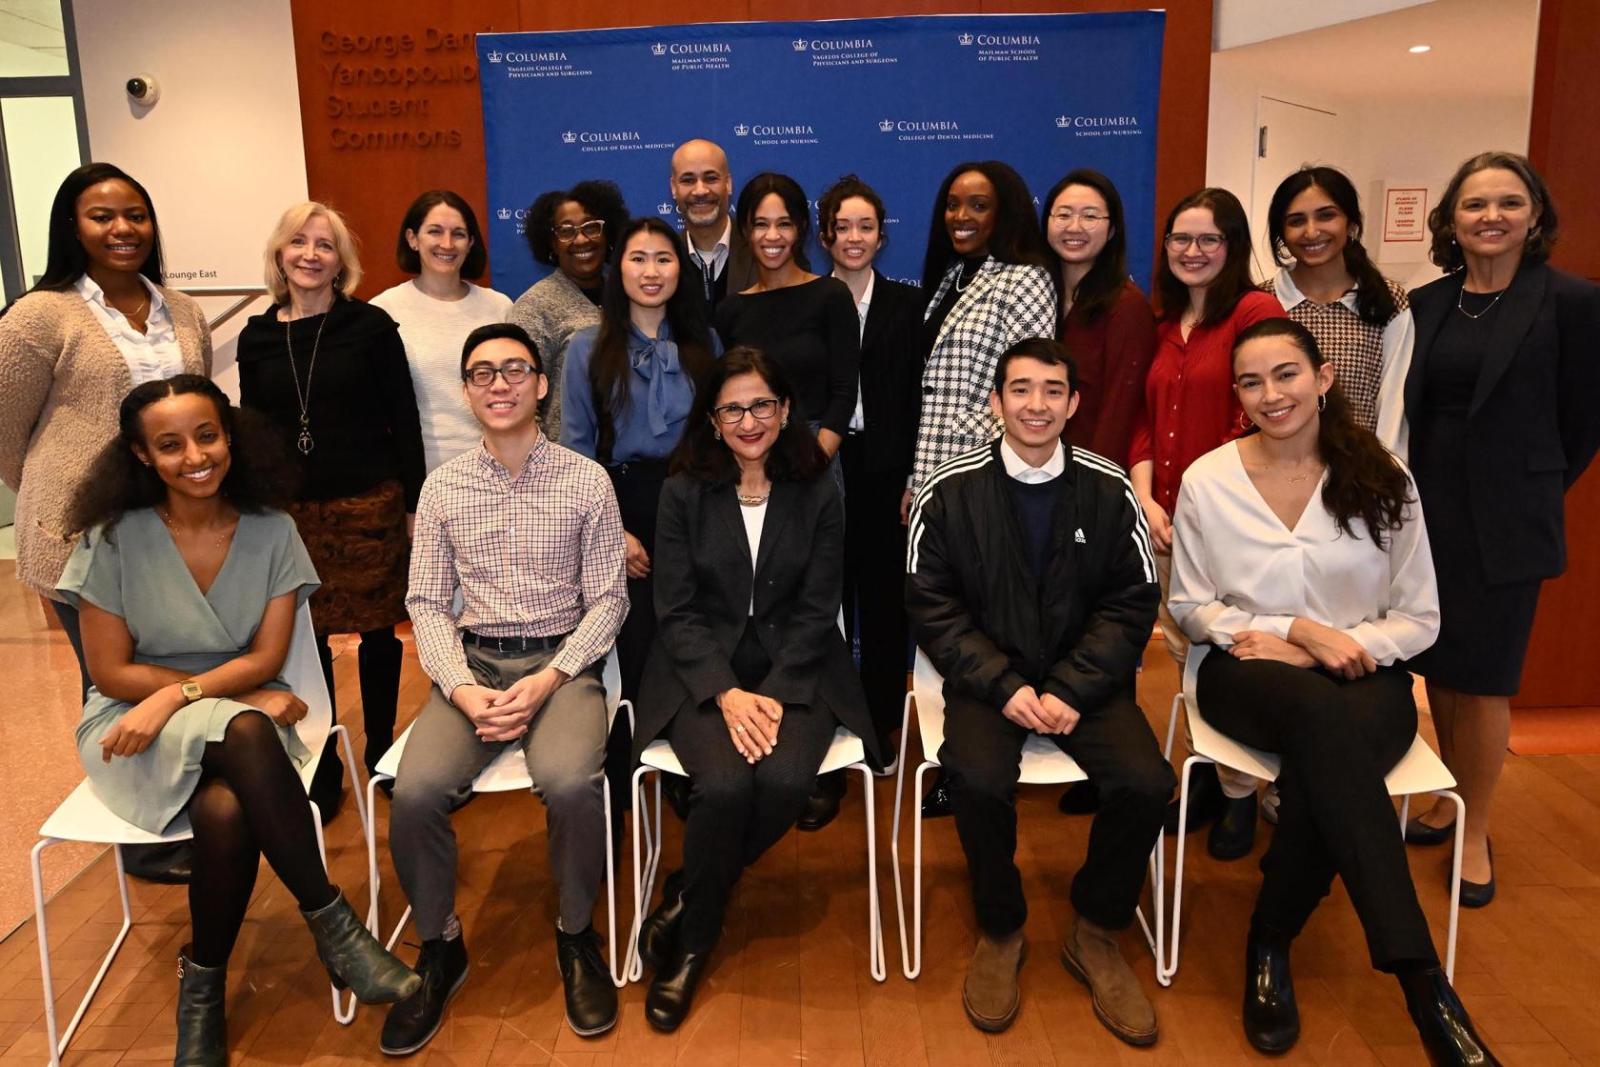 Minouche Shafik met with CUIMC students during her campus tour on Jan. 19.